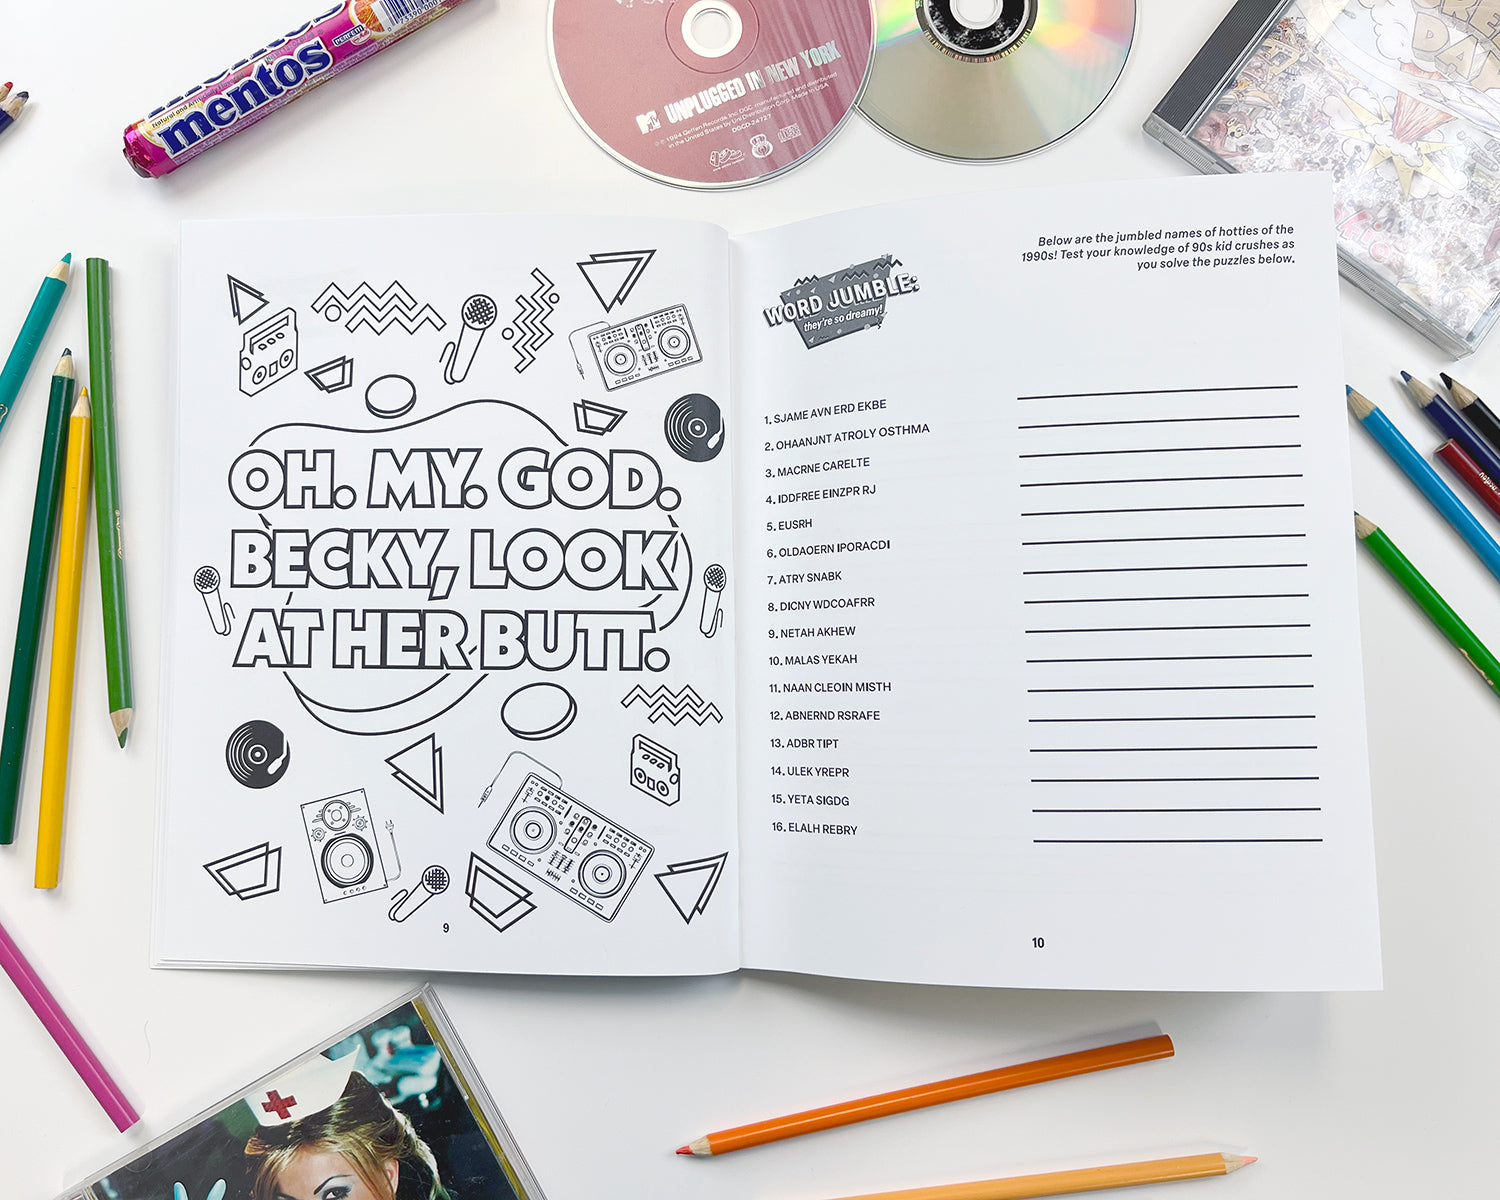 Imperfect Whatever! An Activity Book for 90s Kids